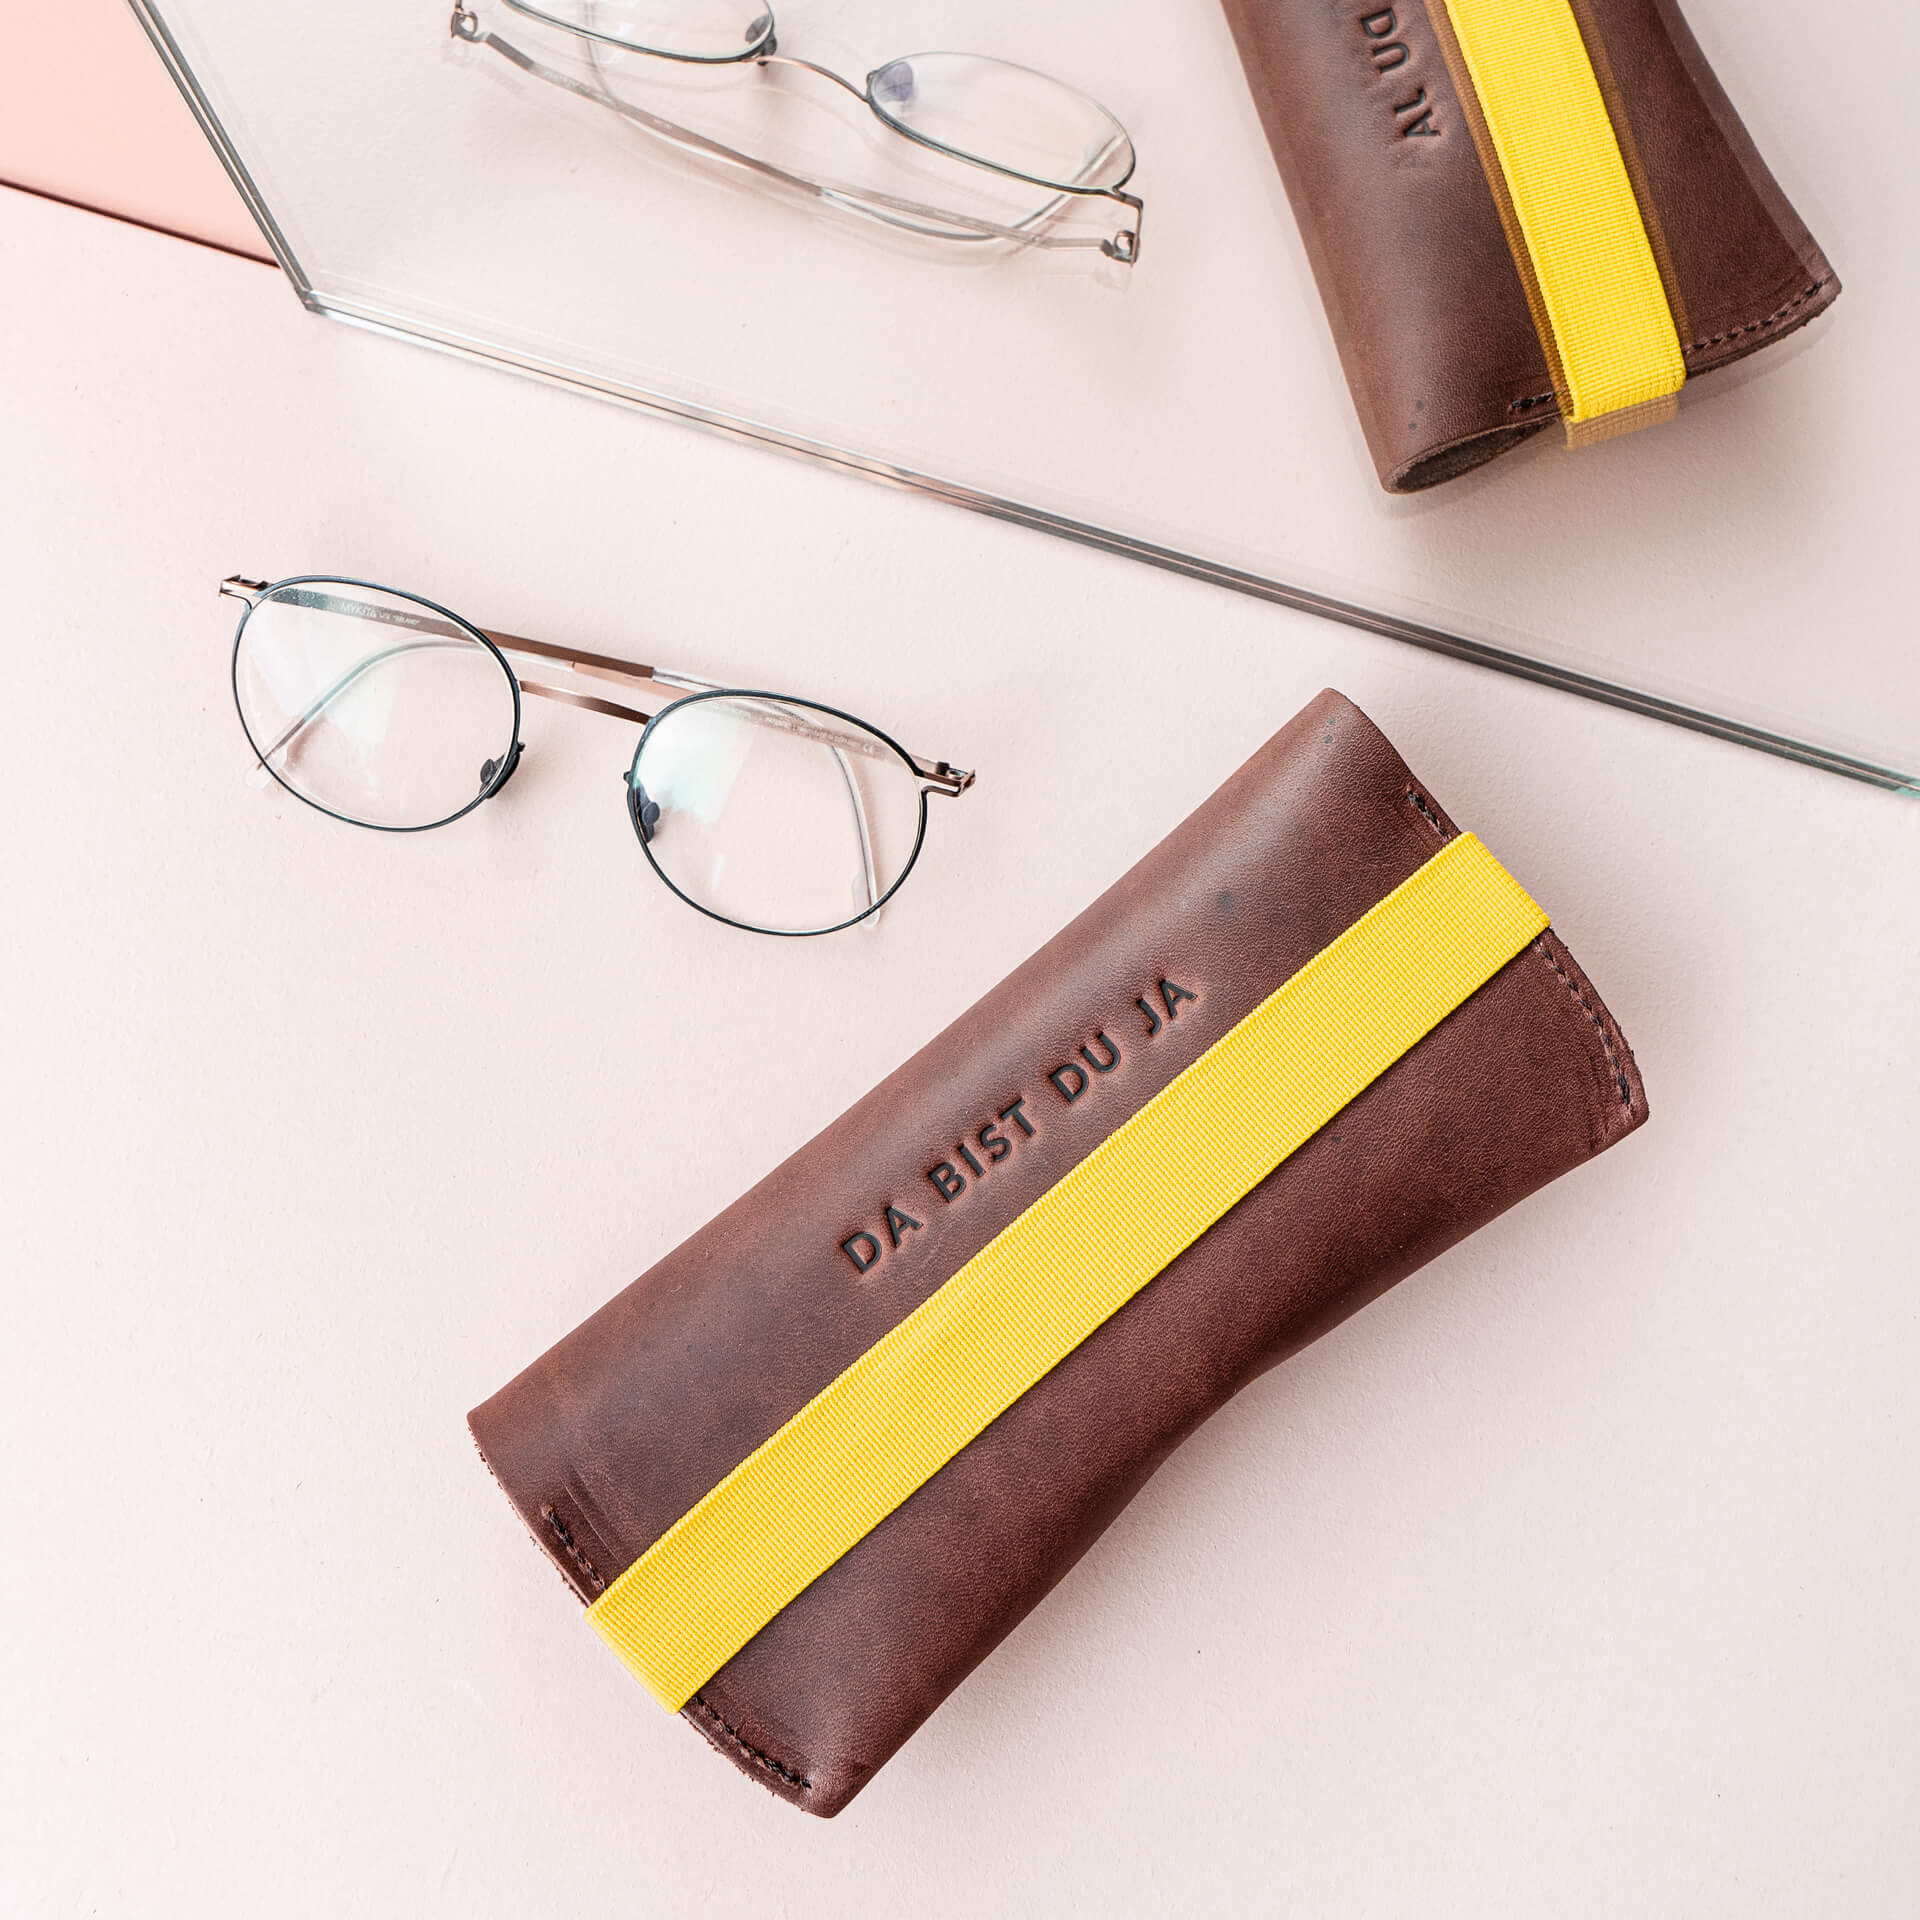 Spectacle case LUK in dark brown with yellow closure band back with individual embossing